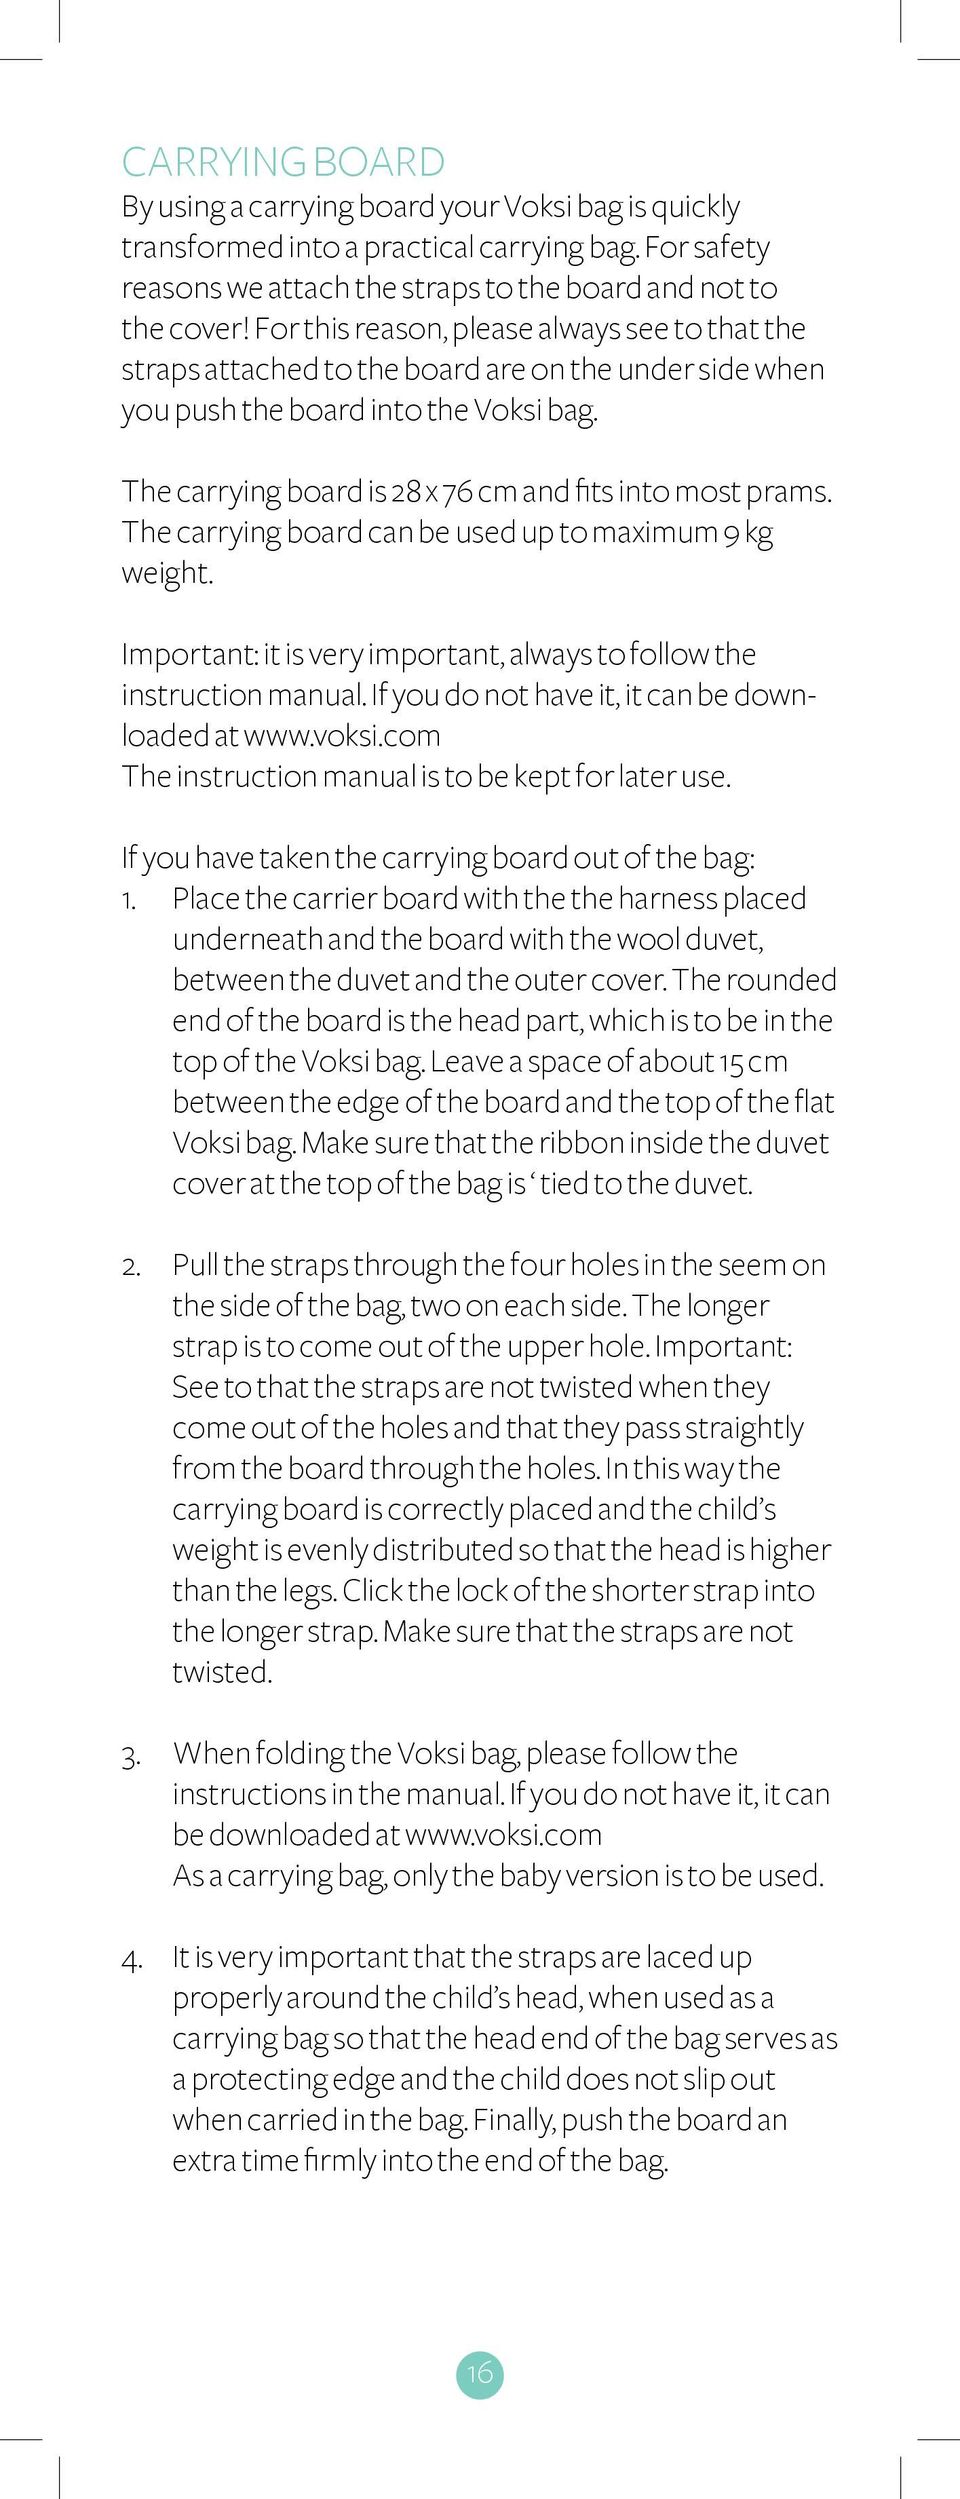 The carrying board can be used up to maximum 9 kg weight. Important: it is very important, always to follow the instruction manual. If you do not have it, it can be downloaded at www.voksi.